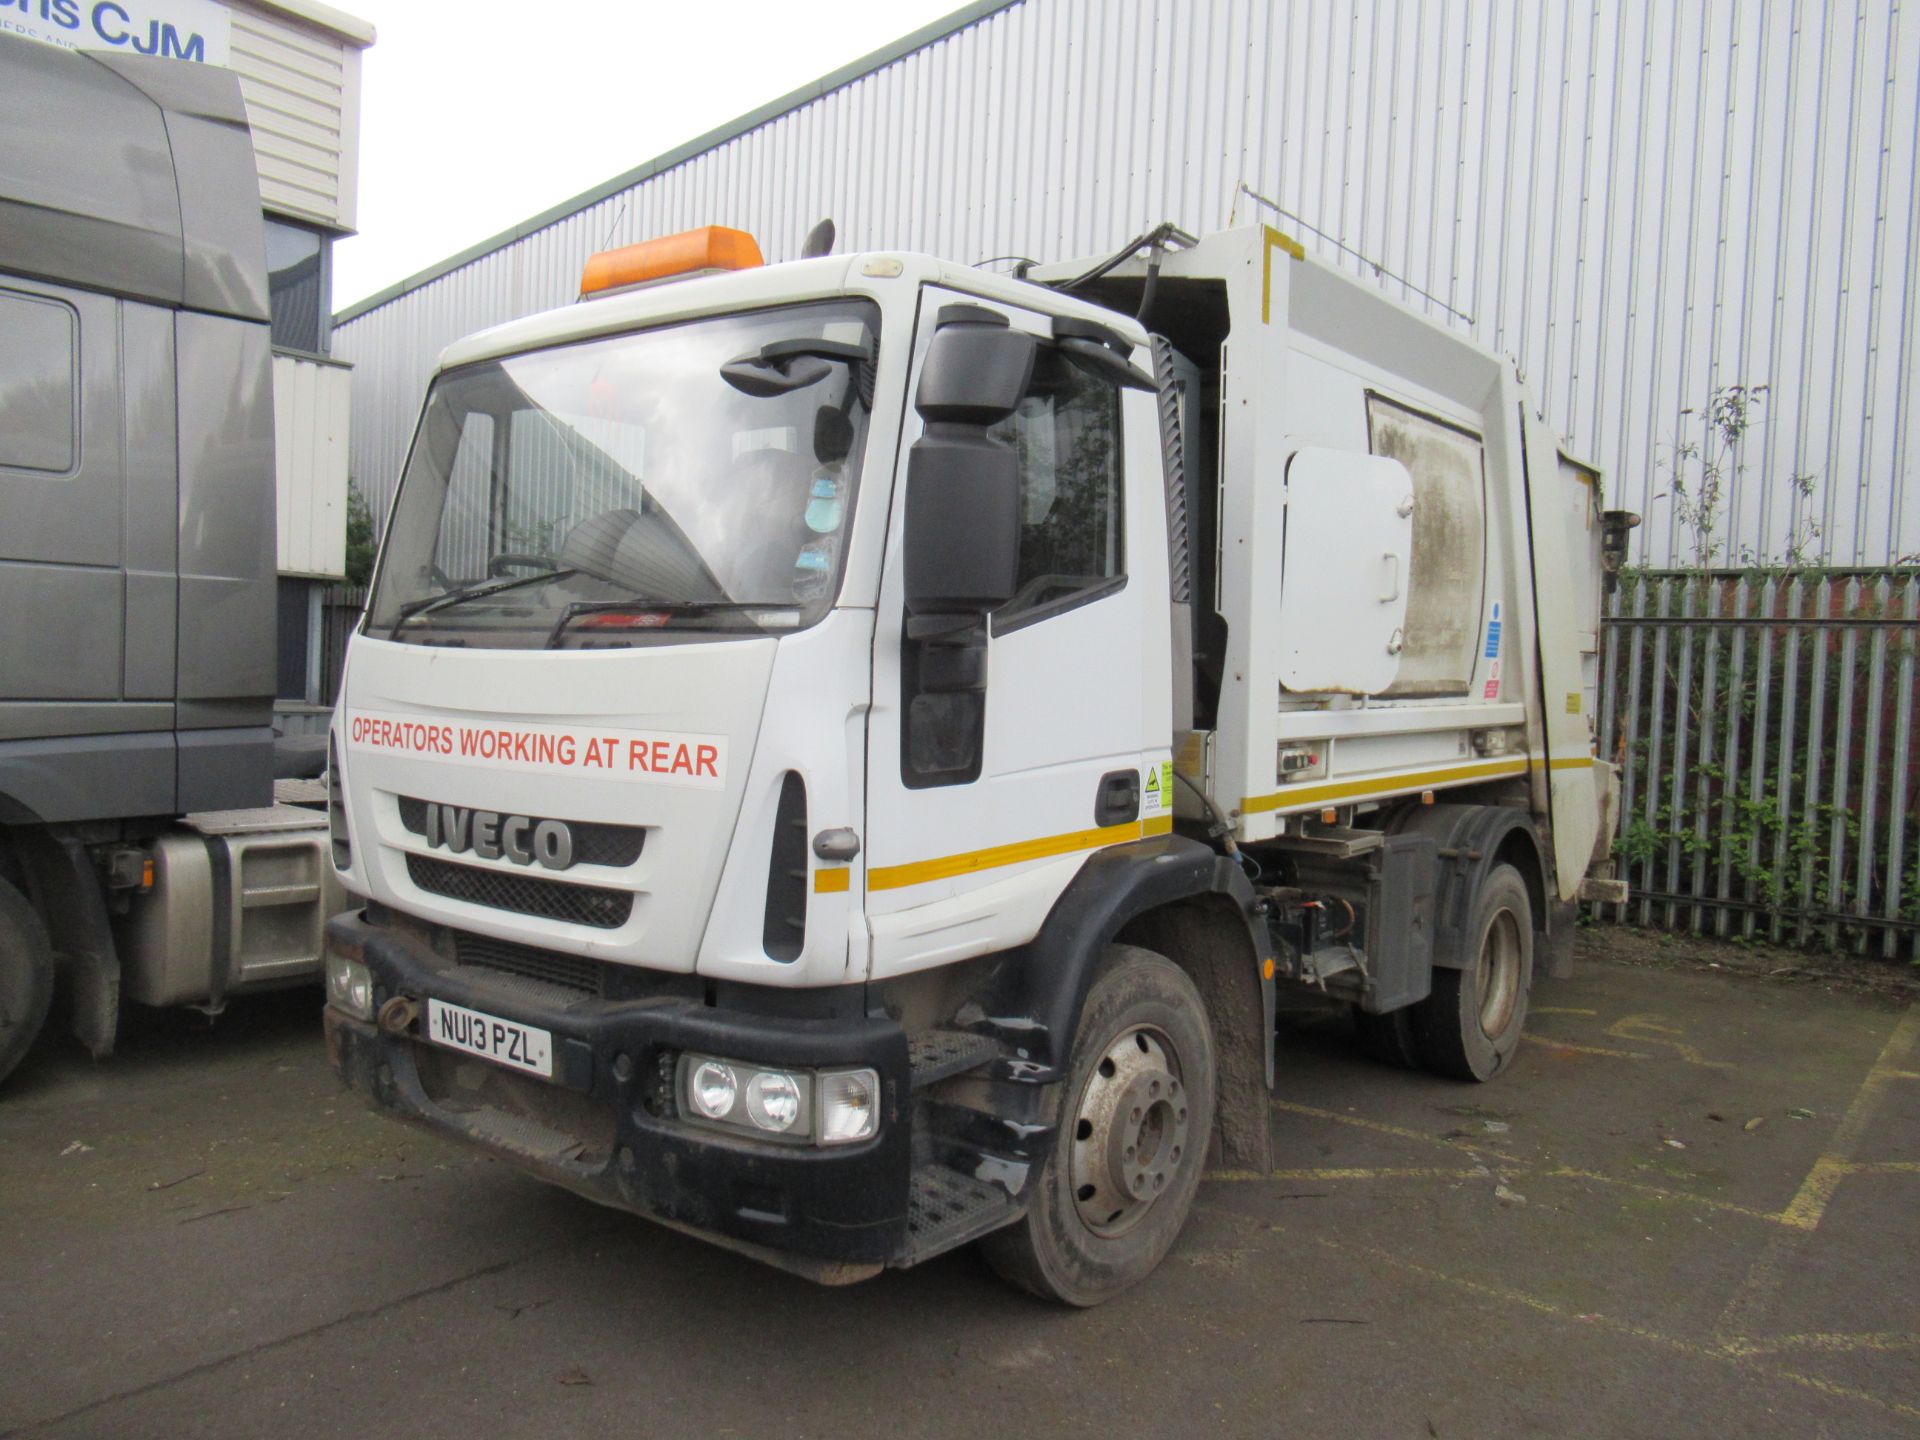 2013 WHITE IVECO EUROCARGO (MY 2008) Refuse Collection Vehicle - Image 2 of 12